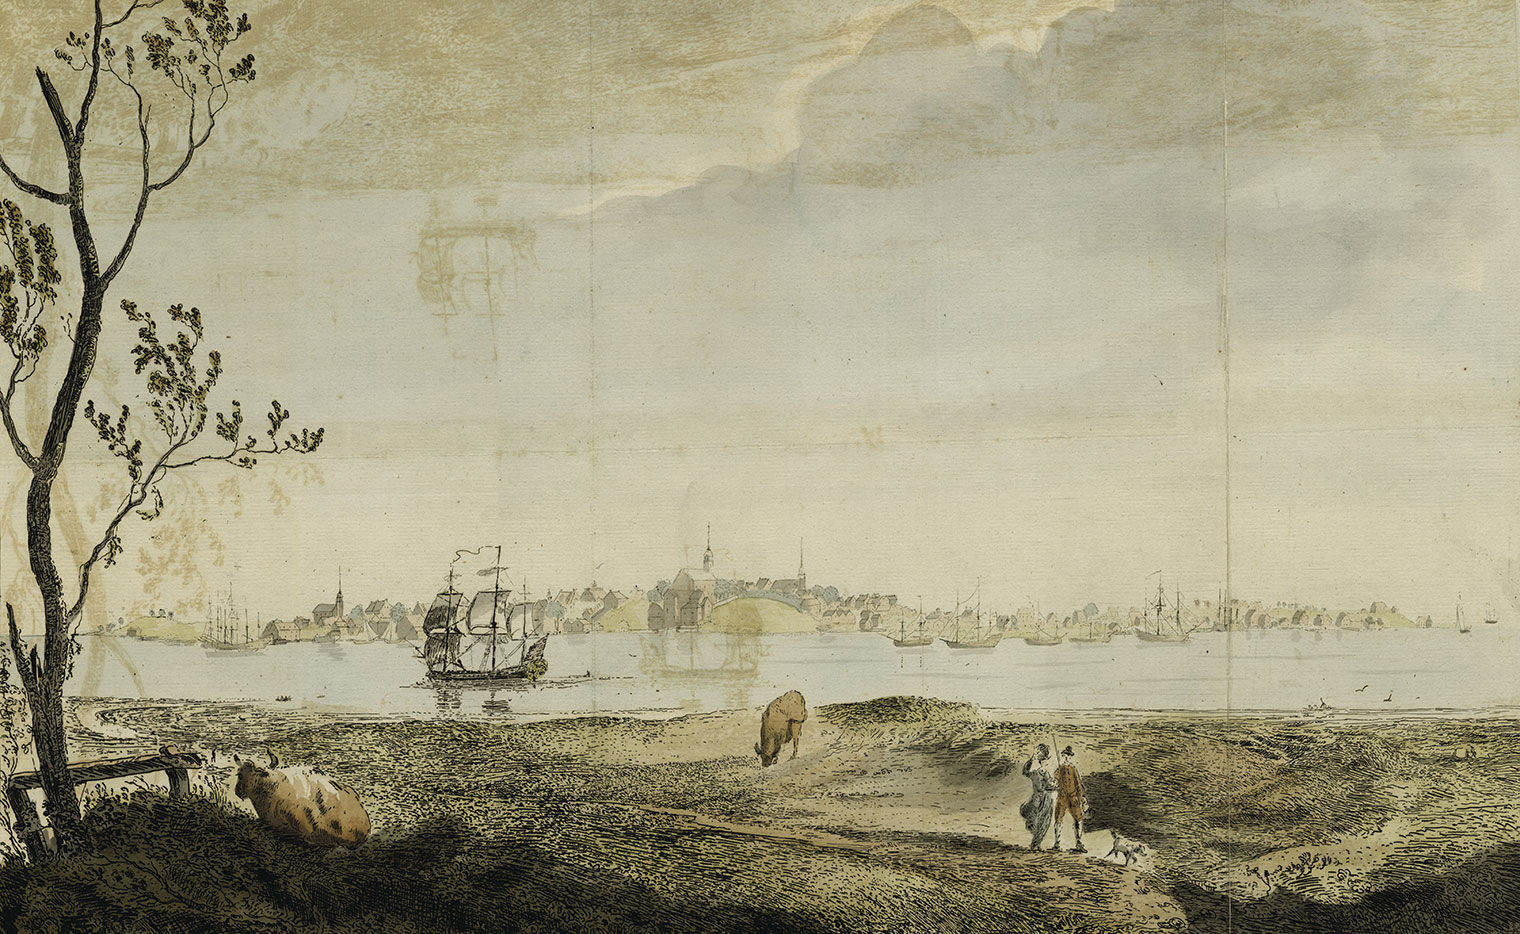 Hand-colored etching of Portsmouth, New Hampshire